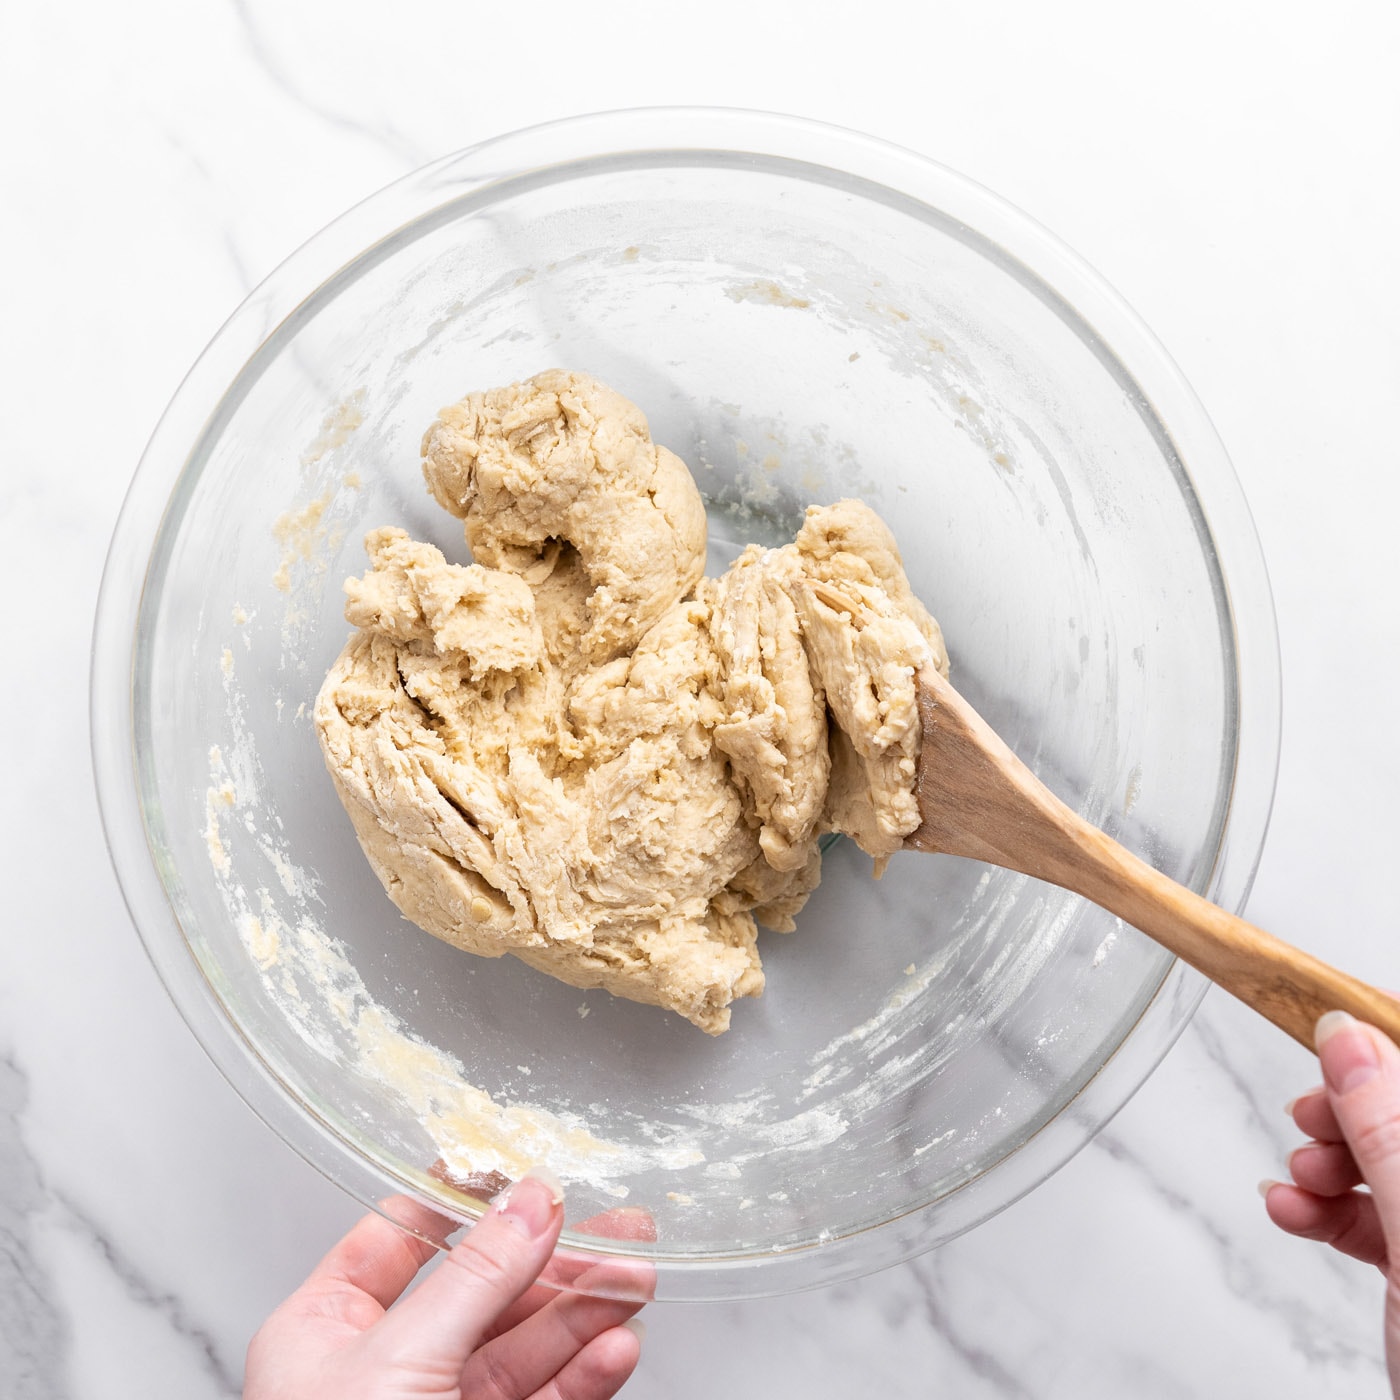 bread dough in a bowl with wooden spoon